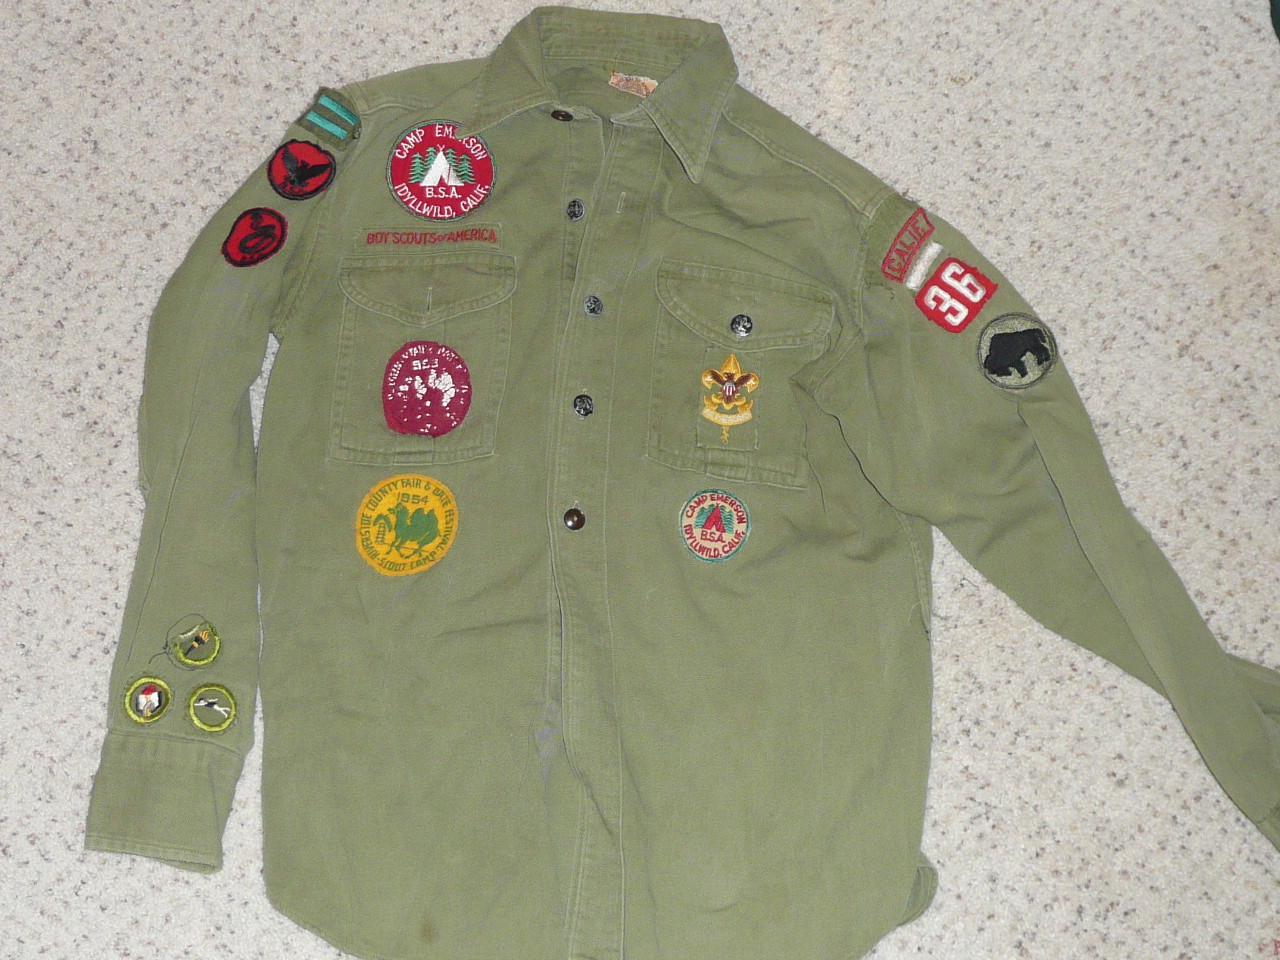 1950's Boy Scout Uniform, Early Camp Emerson and Riverside county council, 20" Chest and 26" Length, #FB43